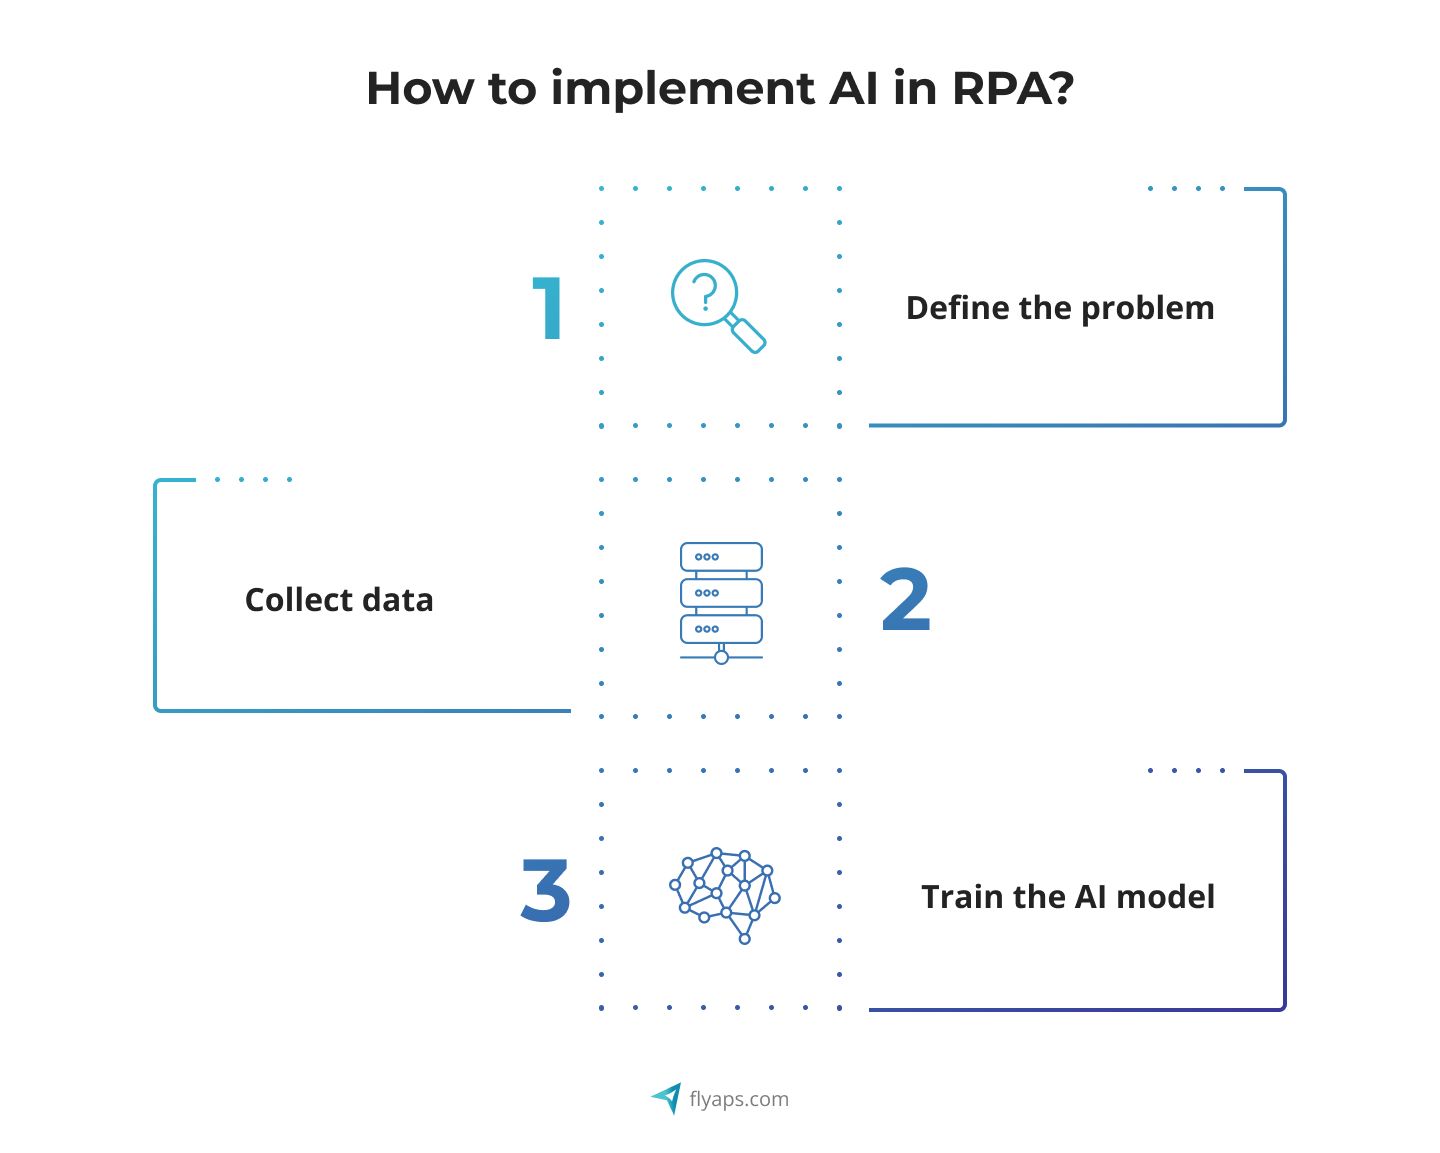 Steps how to Implement AI in RPA